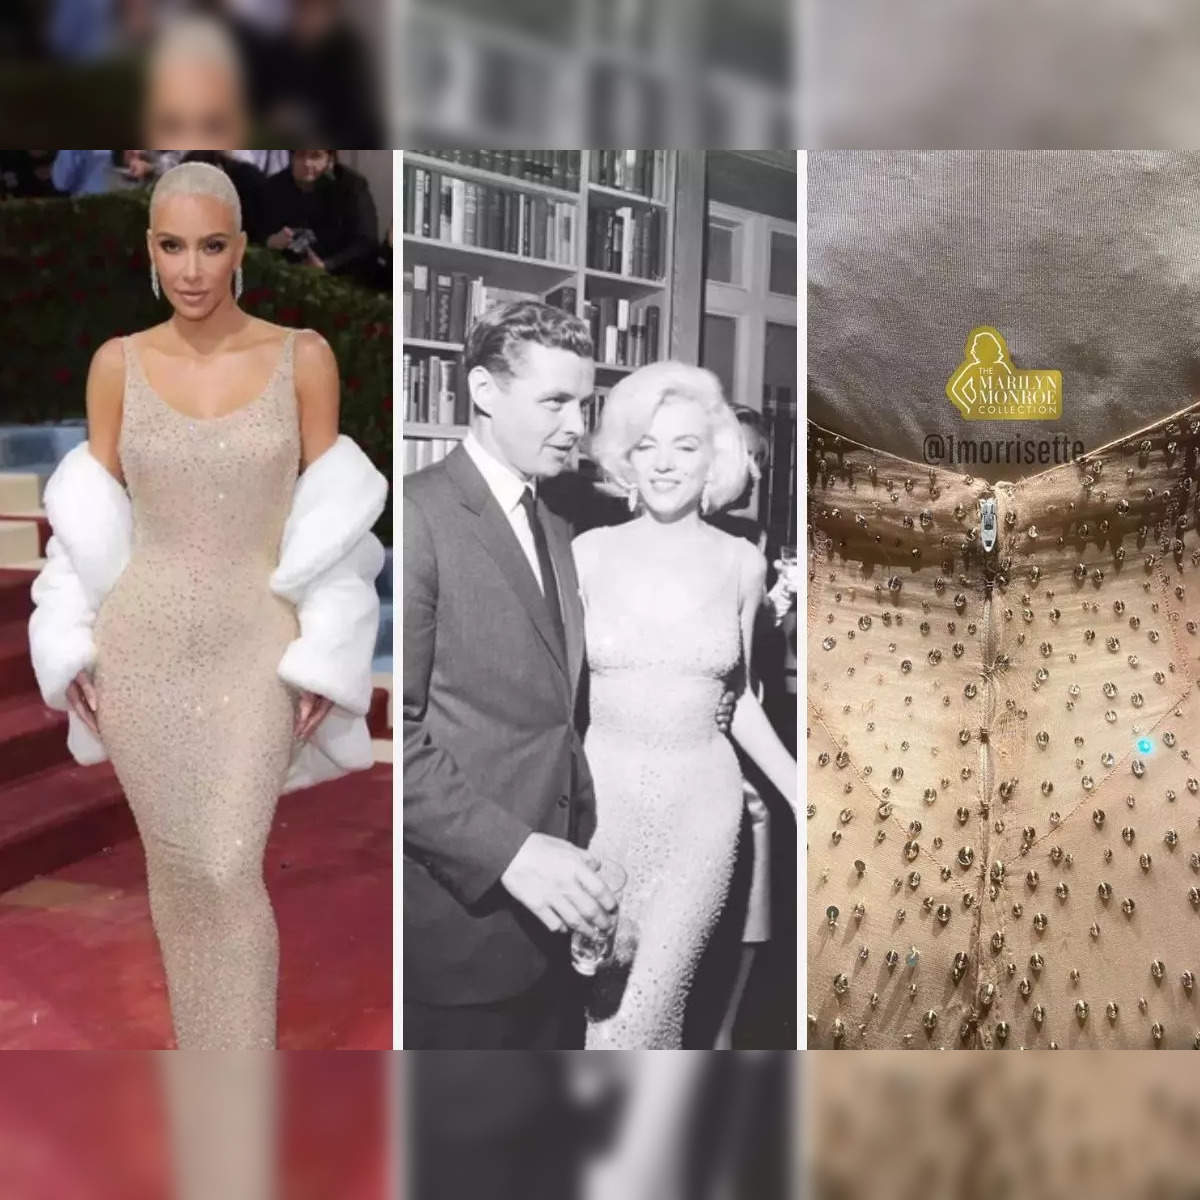 Watch: Kim Kardashian couldn't zip up the OG Marilyn Monroe dress for the  Met Gala 2022, historians feel the fashion mogul put an ICONIC piece at  risk!